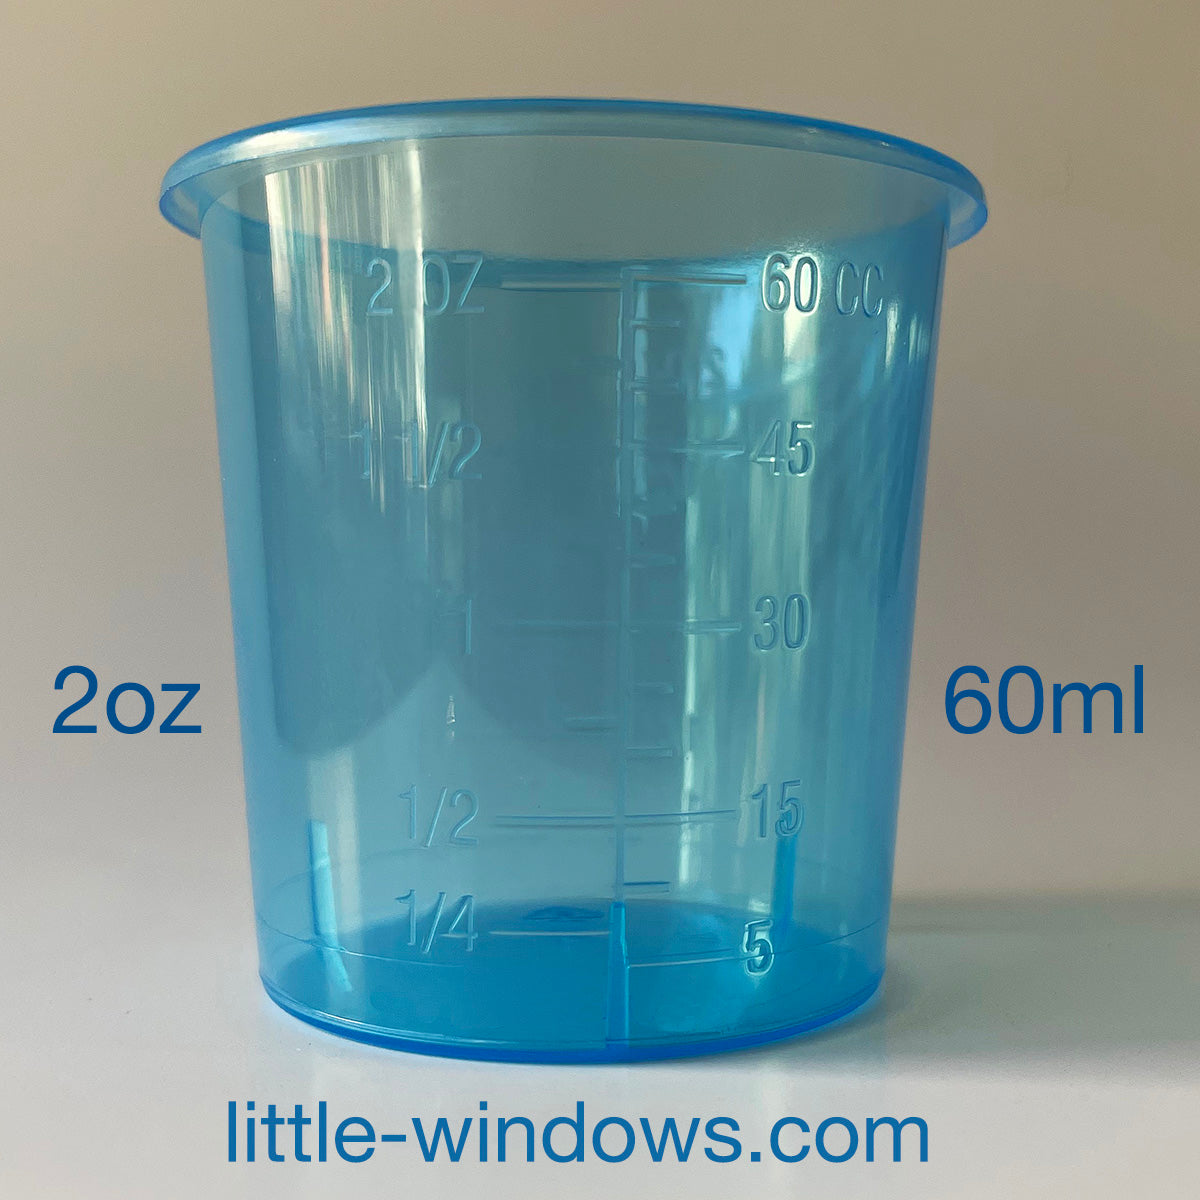 Measuring cup (2 cup)